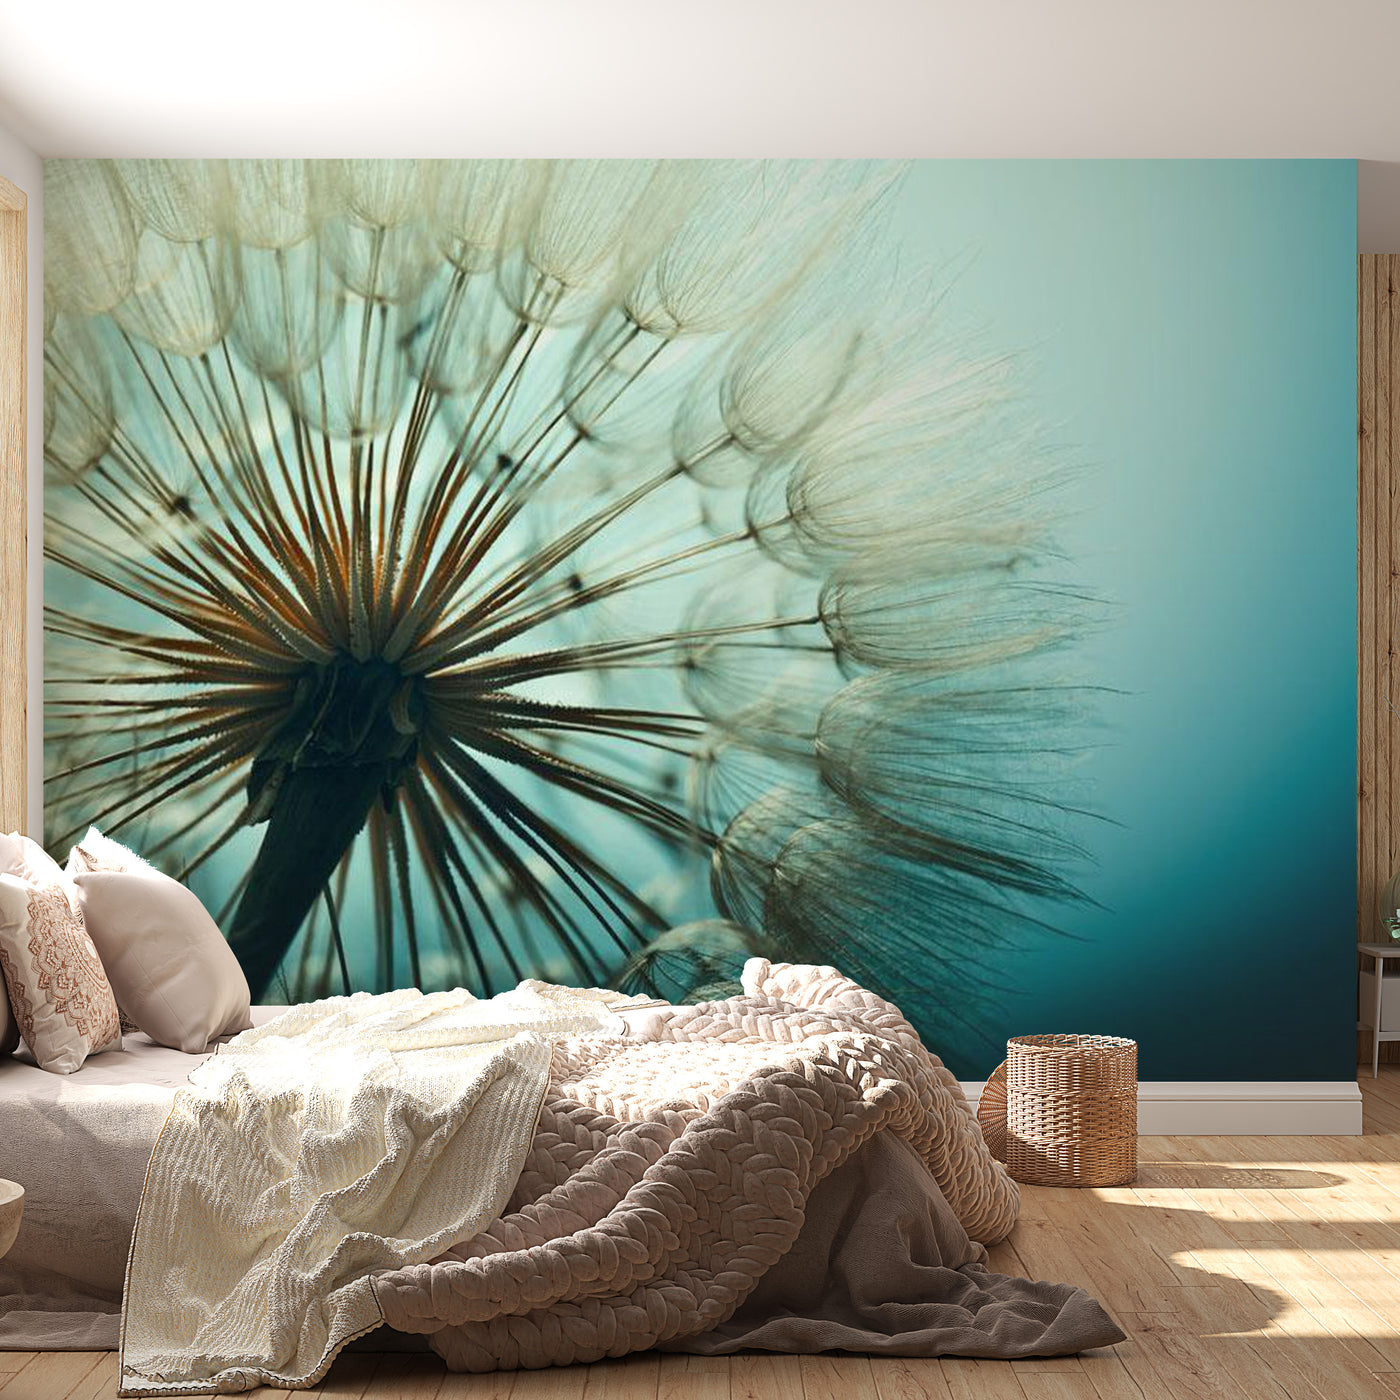 Peel & Stick Botanical Wall Mural - Blue Fascination Dandelion - Removable Wall Decals